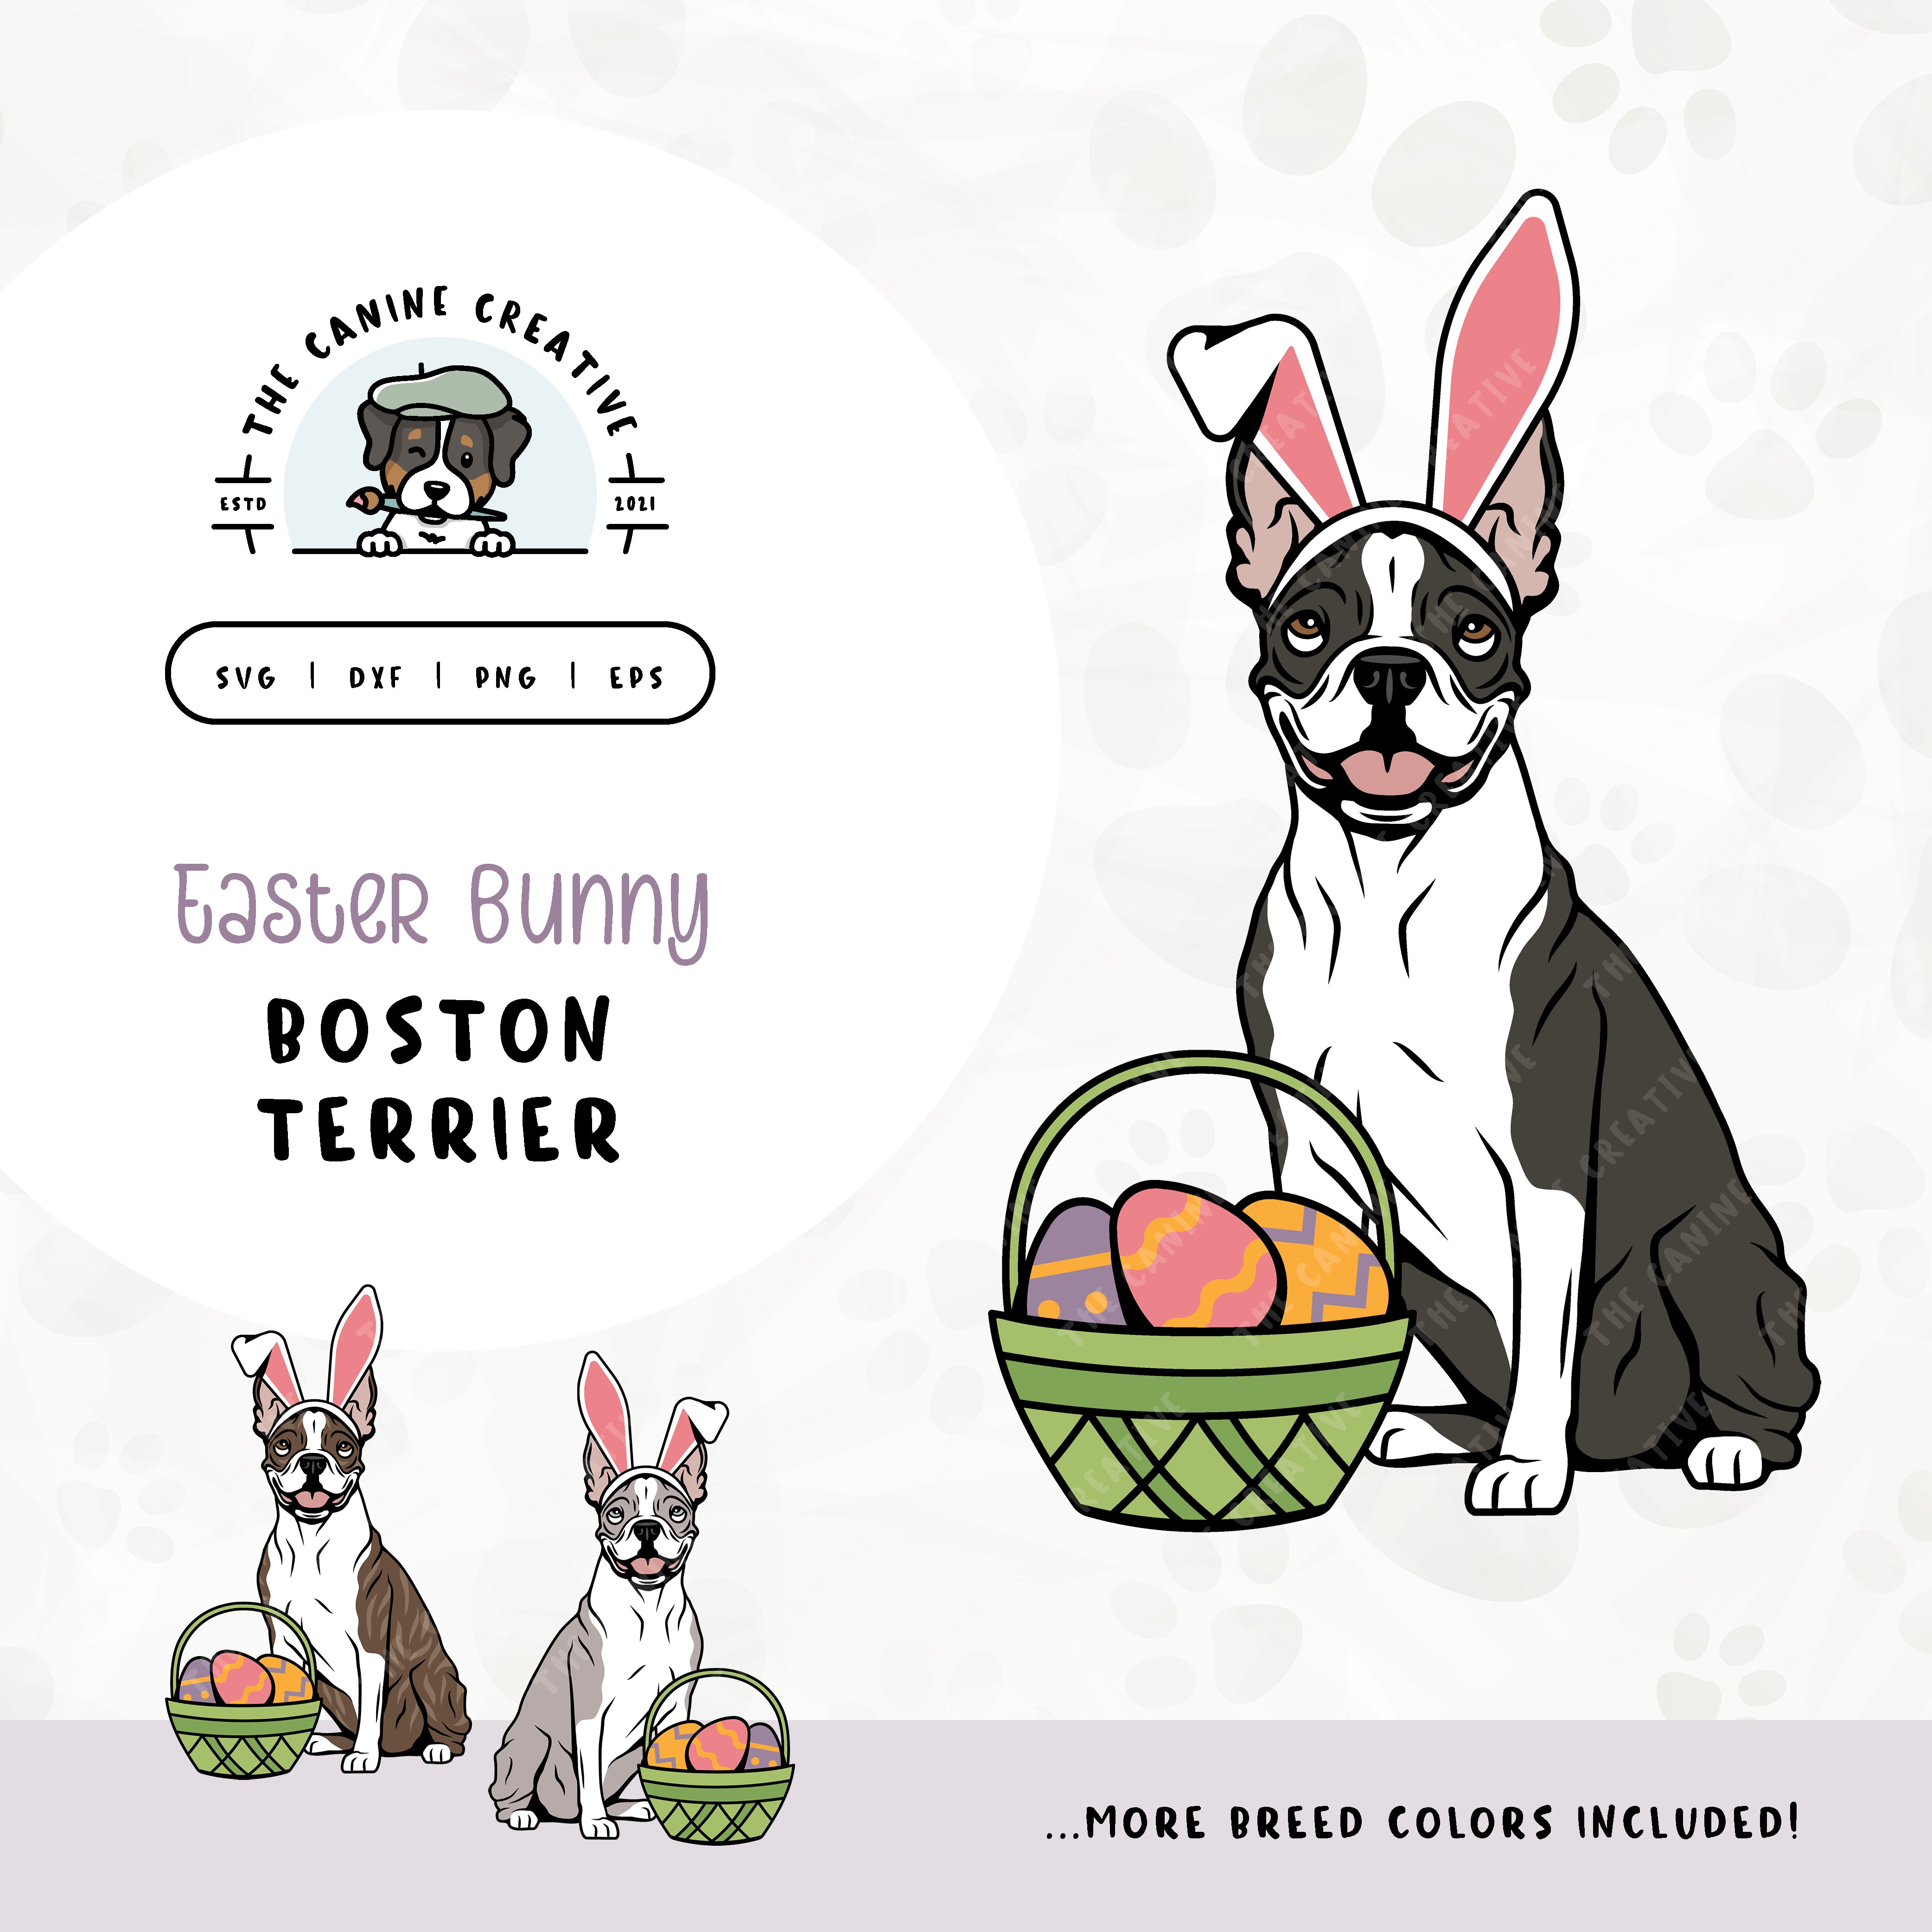 This springtime illustration features a Boston Terrier adorned with festive bunny ears sitting next to a basket of brightly-colored Easter eggs. File formats include: SVG, DXF, PNG, and EPS.